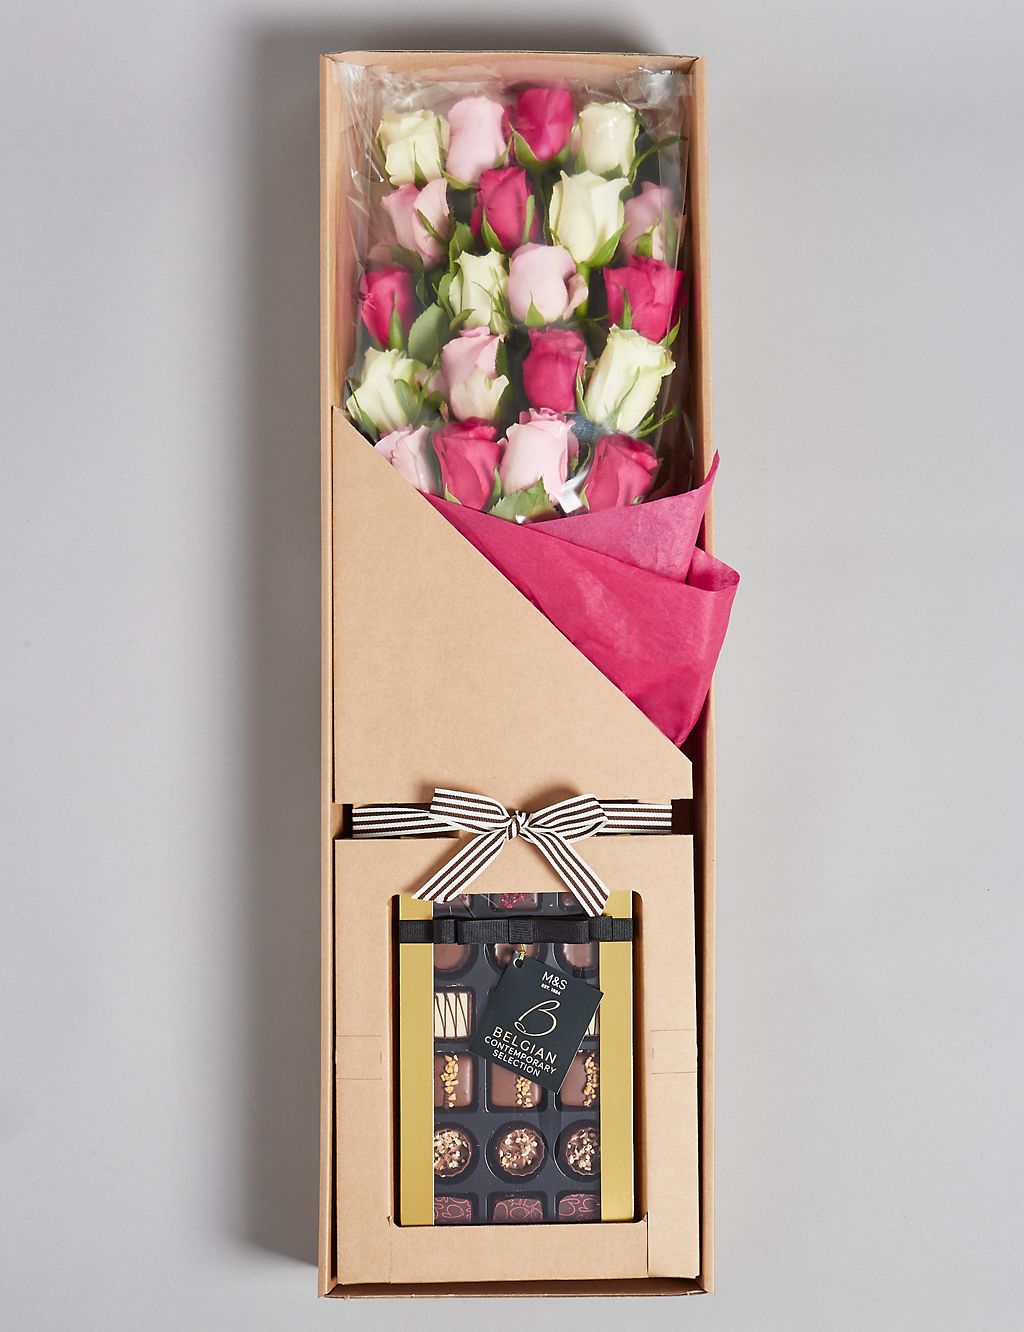 Pink Rose & Chocolate Gift Selection 1 of 4